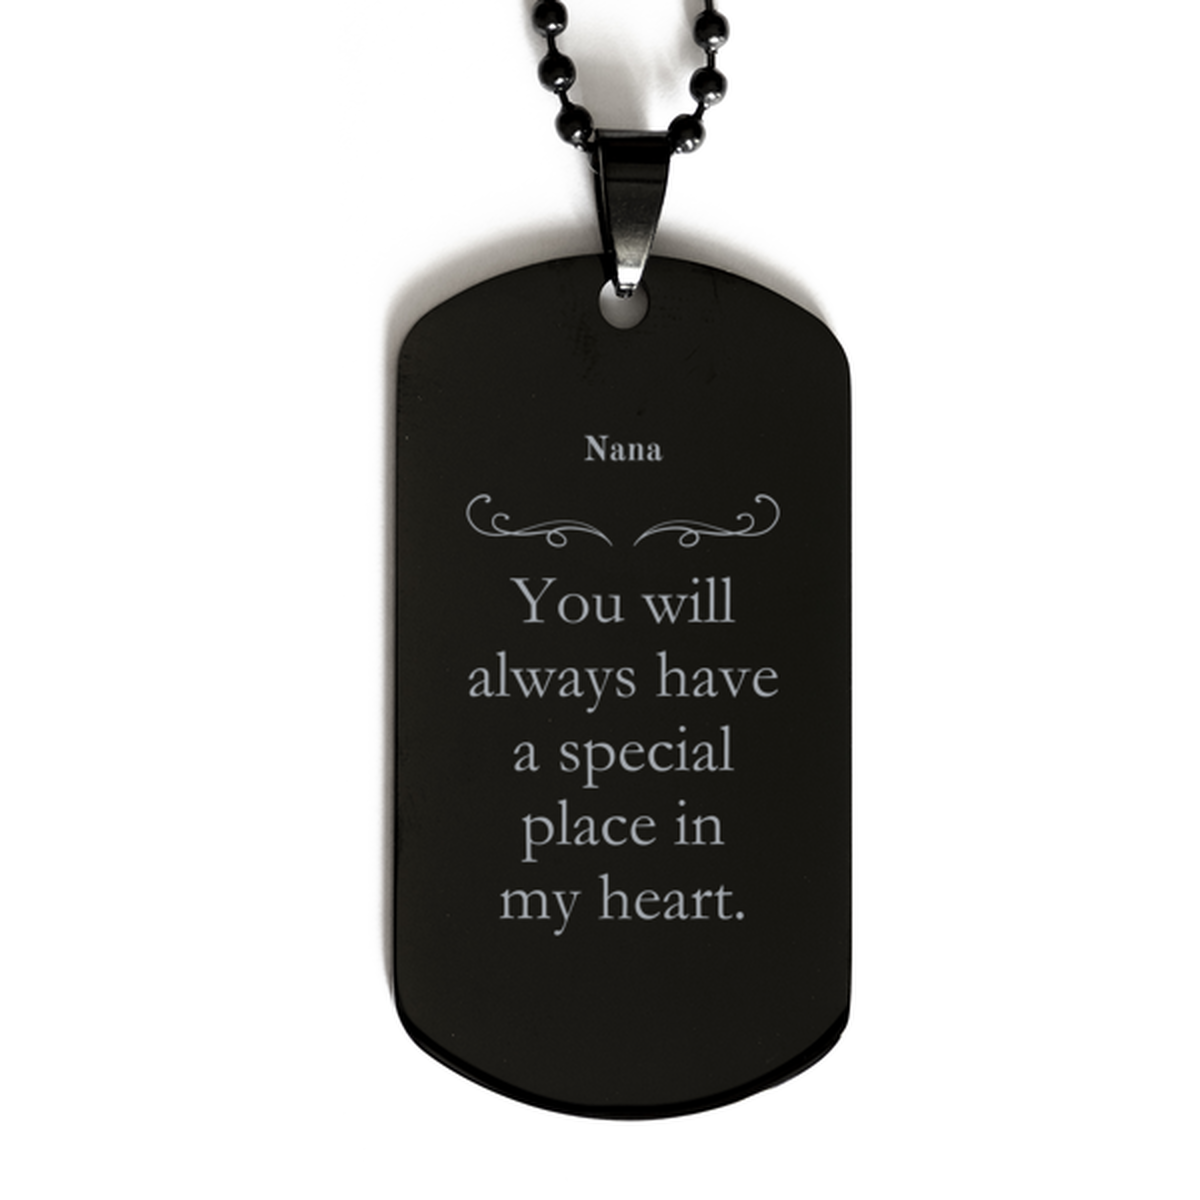 Engraved Black Dog Tag Nana Youll Always Have A Special Place In My Heart Gift for Birthday, Graduation, Veterans Day - Unique and Inspirational Keepsake for Nana - Confidence and Hope Filler - Christmas and Easter Gift Idea